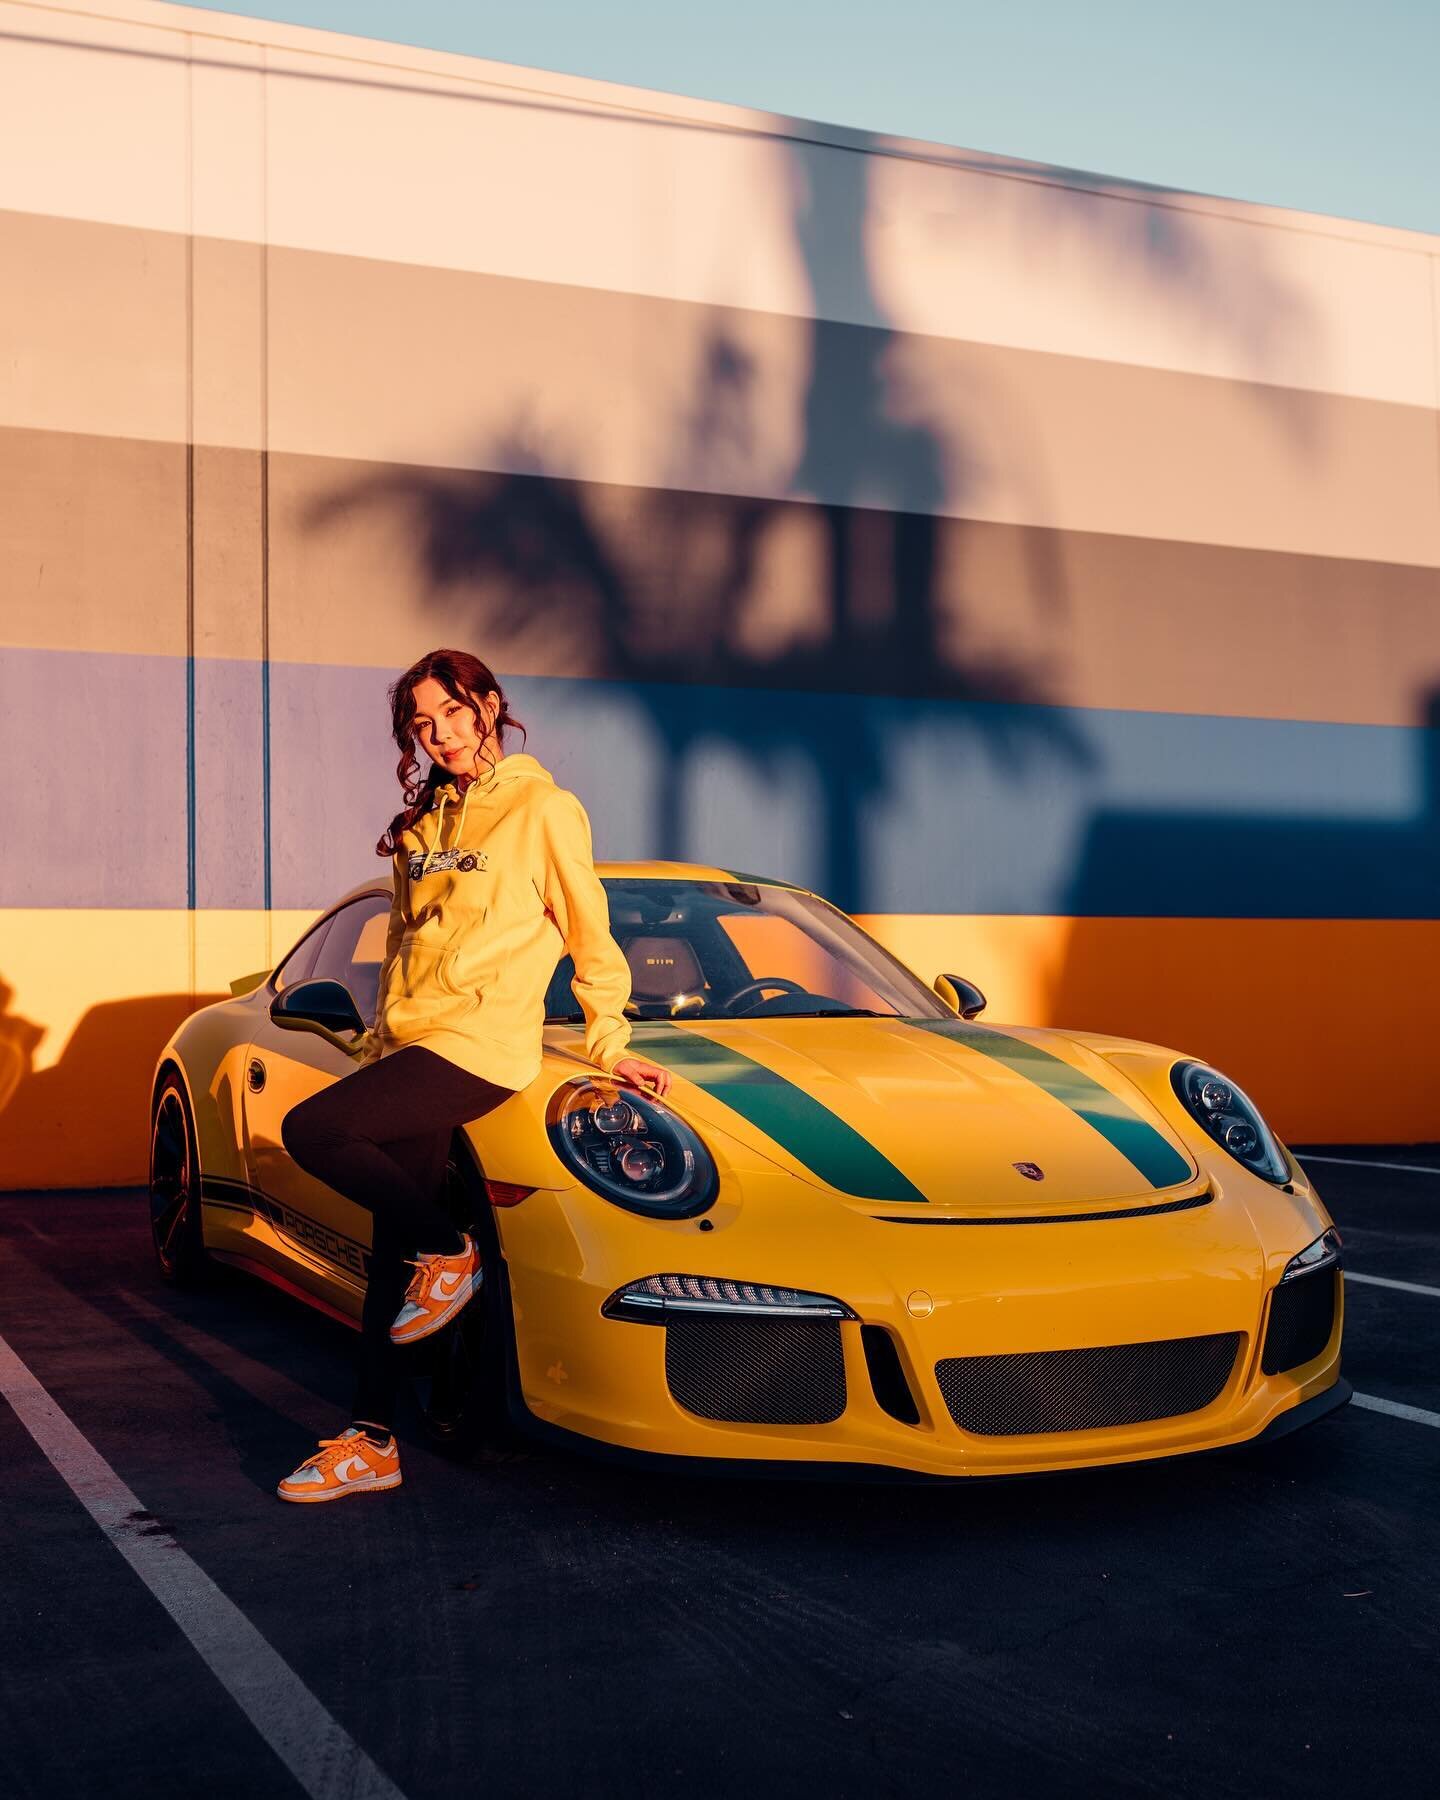 Yellow hoodie to match the whip 🚖 What color are you rocking? 🟡 

STR merch available on our online shop (link in bio) 
👉 ST-RACING.ORG/SHOP

📸: @apexpixel